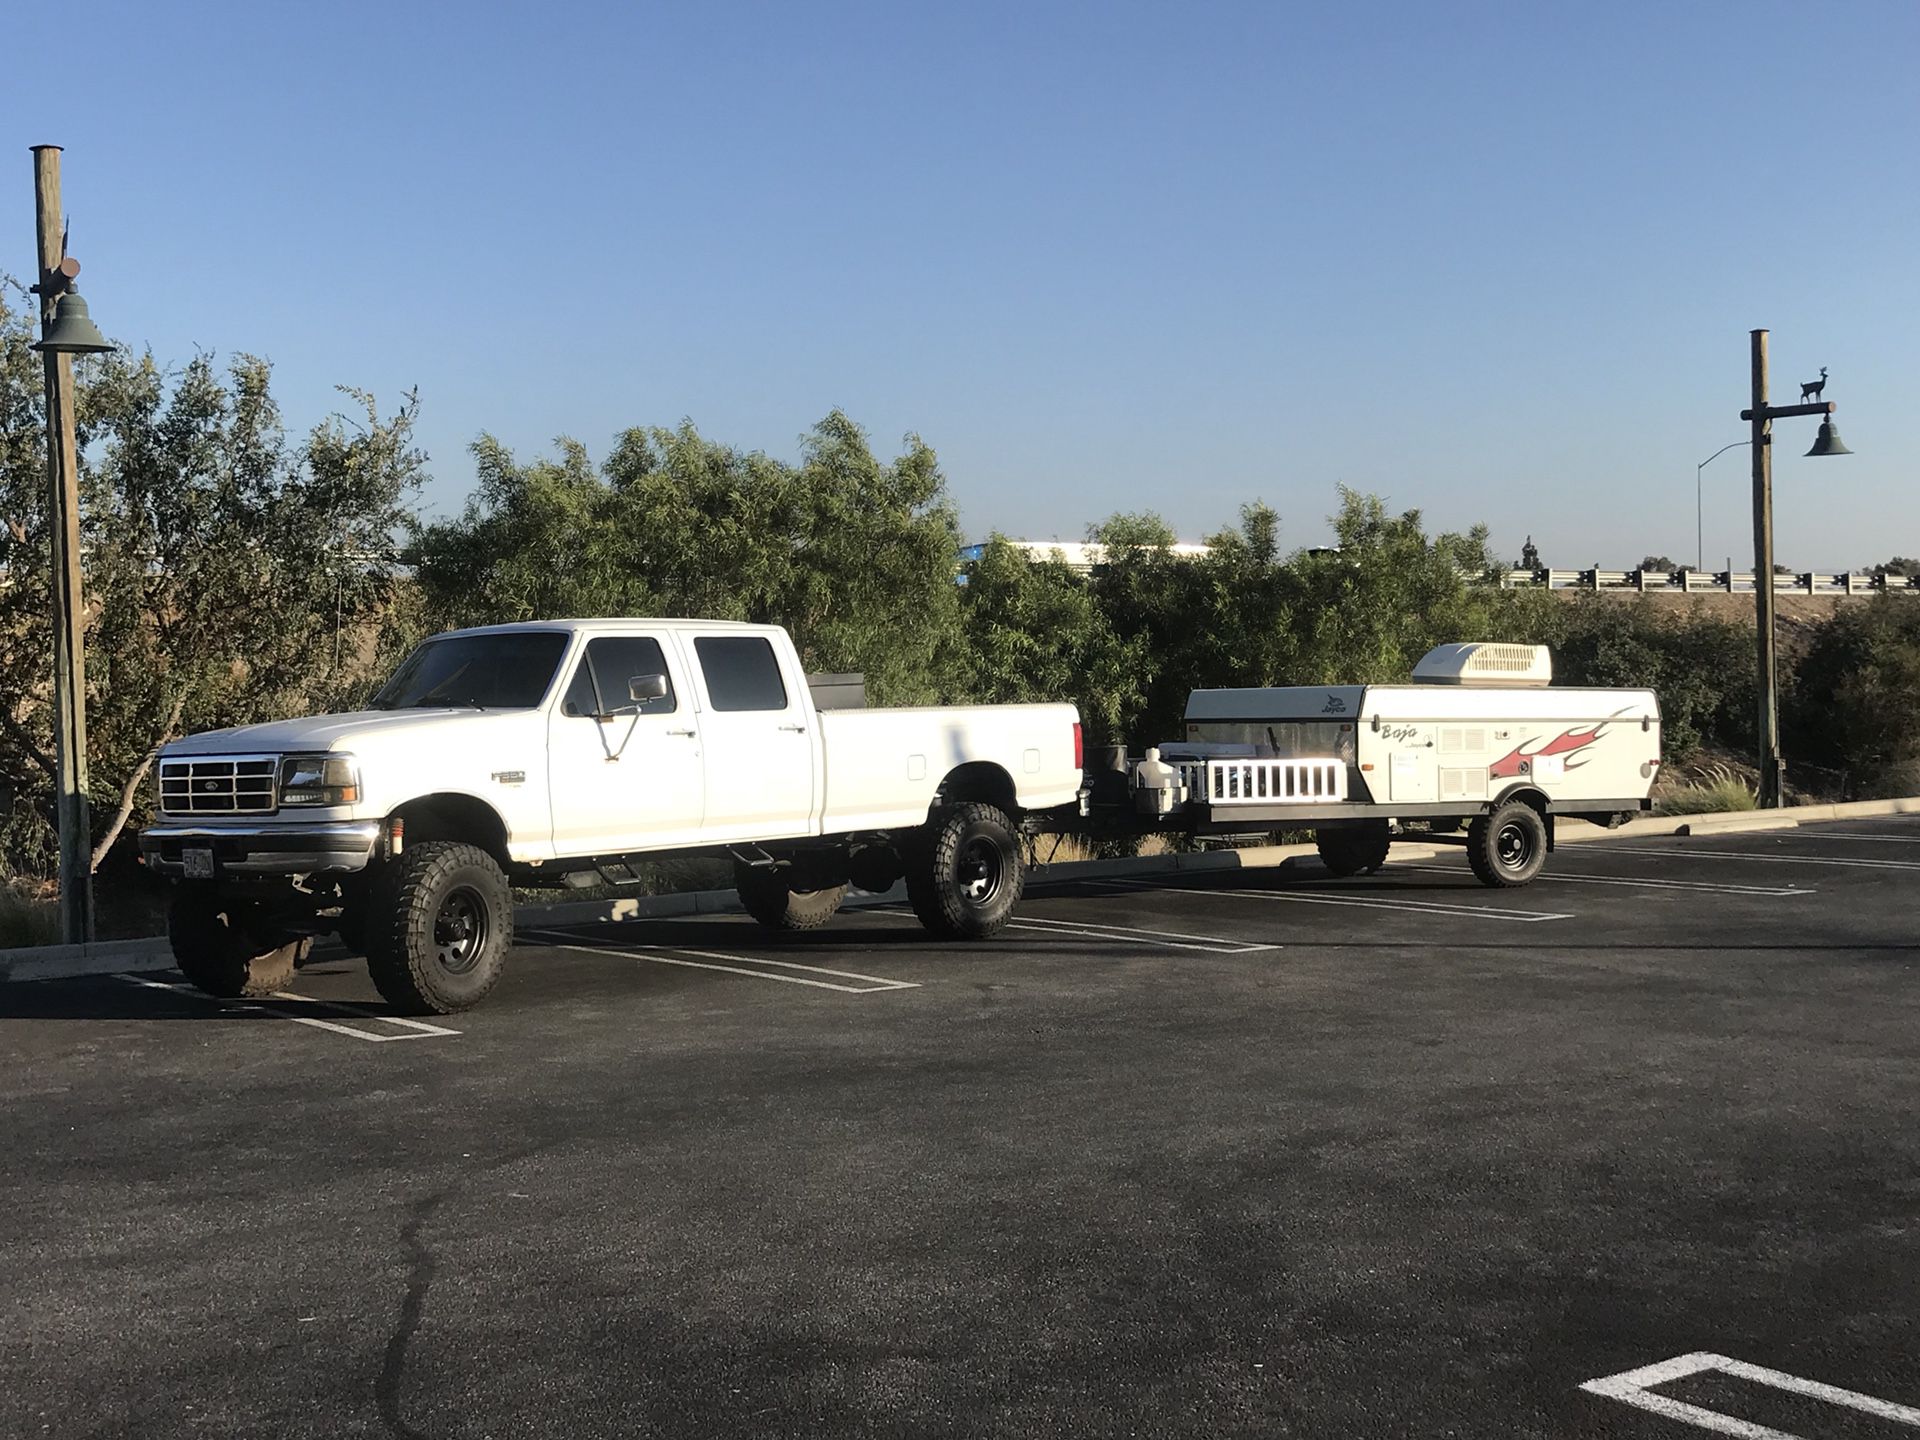 Ford F-350 7.3 Diesel and Jayco pop up camper